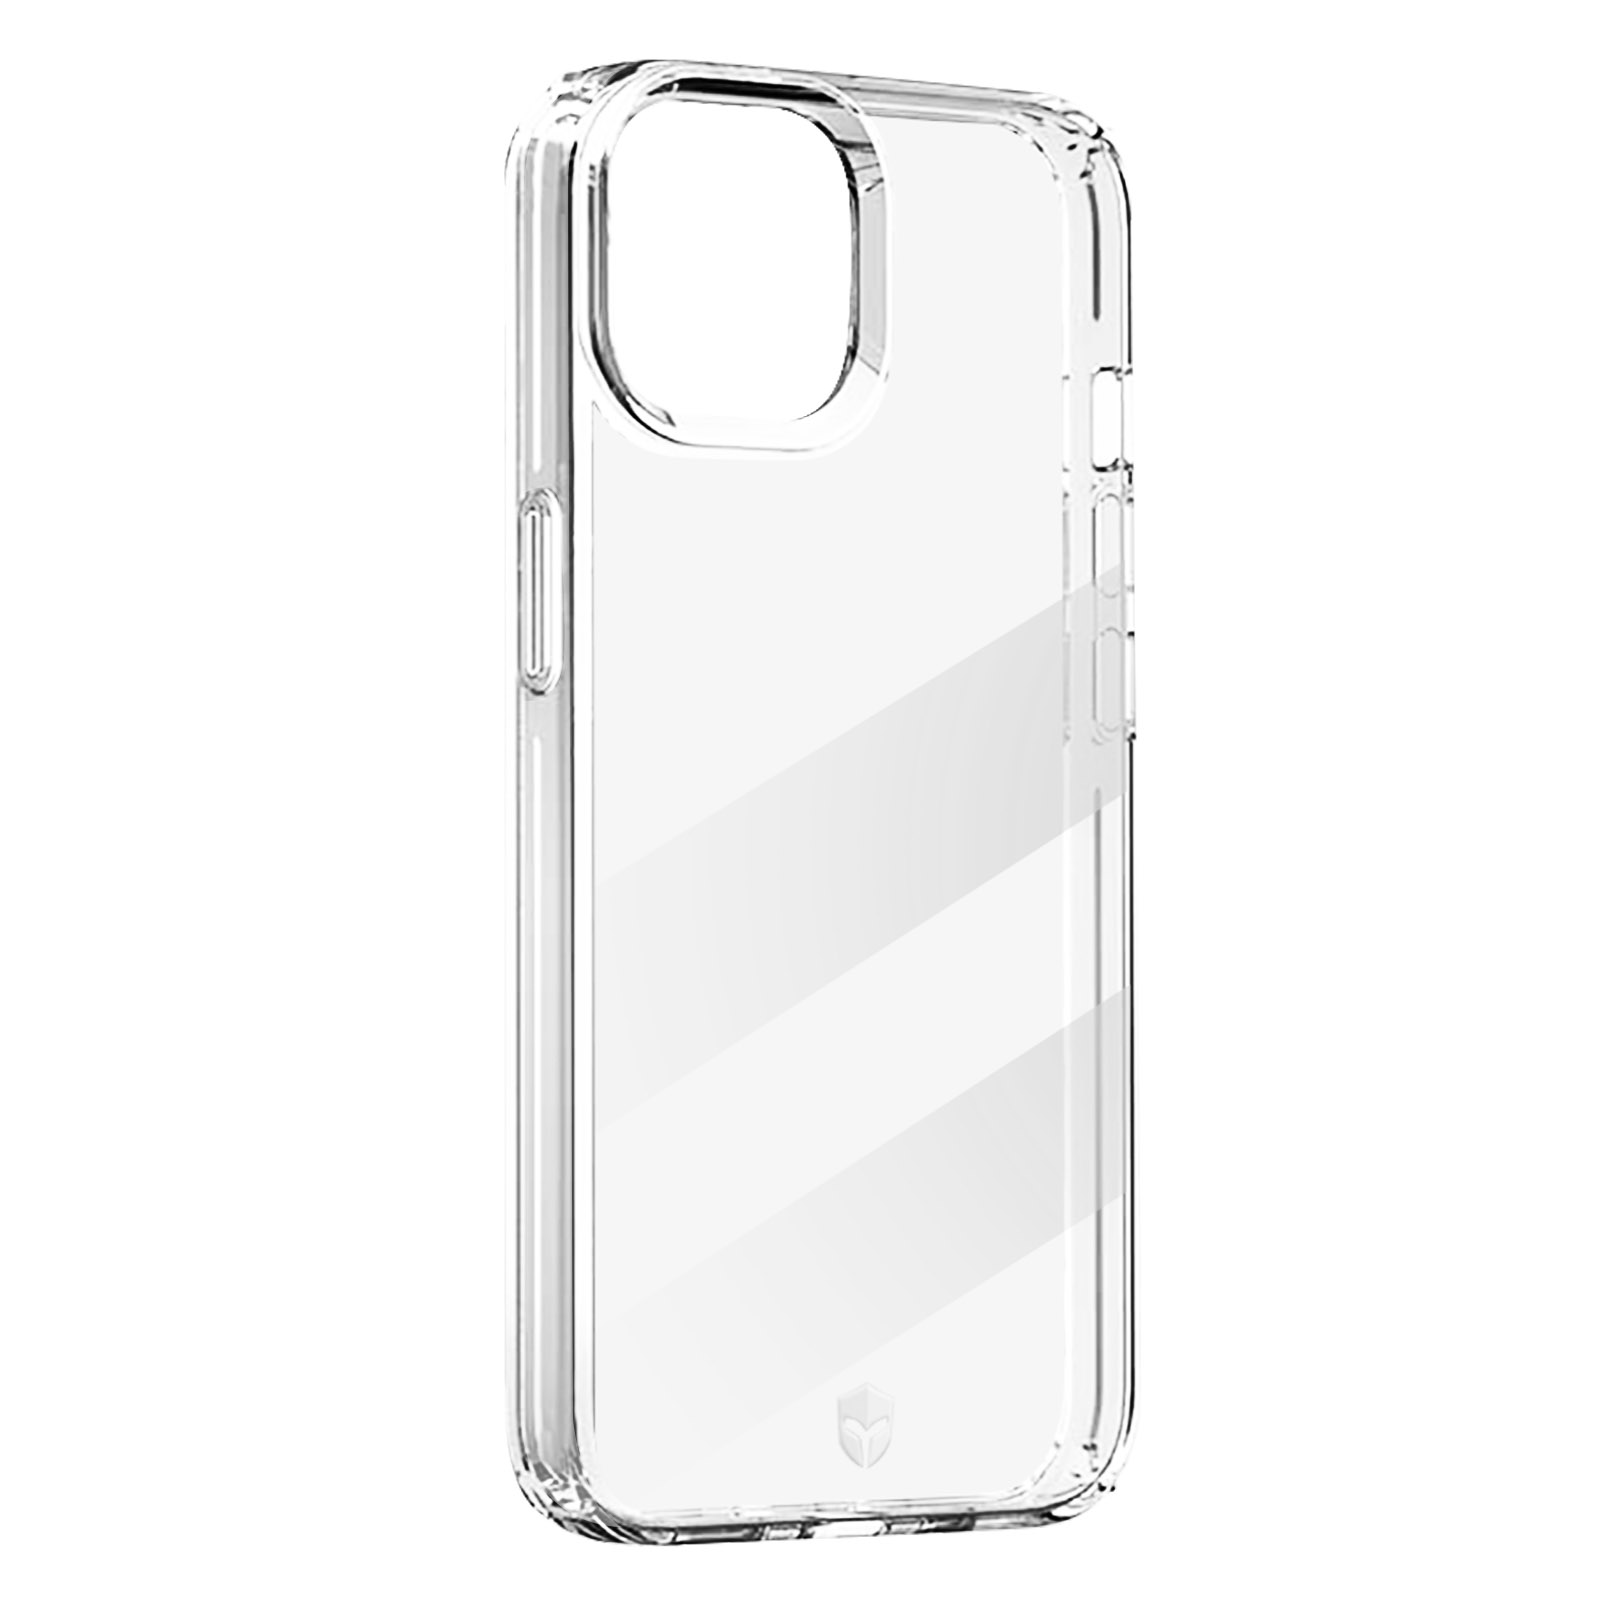 Feel Backcover, 14, Transparent CASE FORCE iPhone Apple, Handyhülle Series,